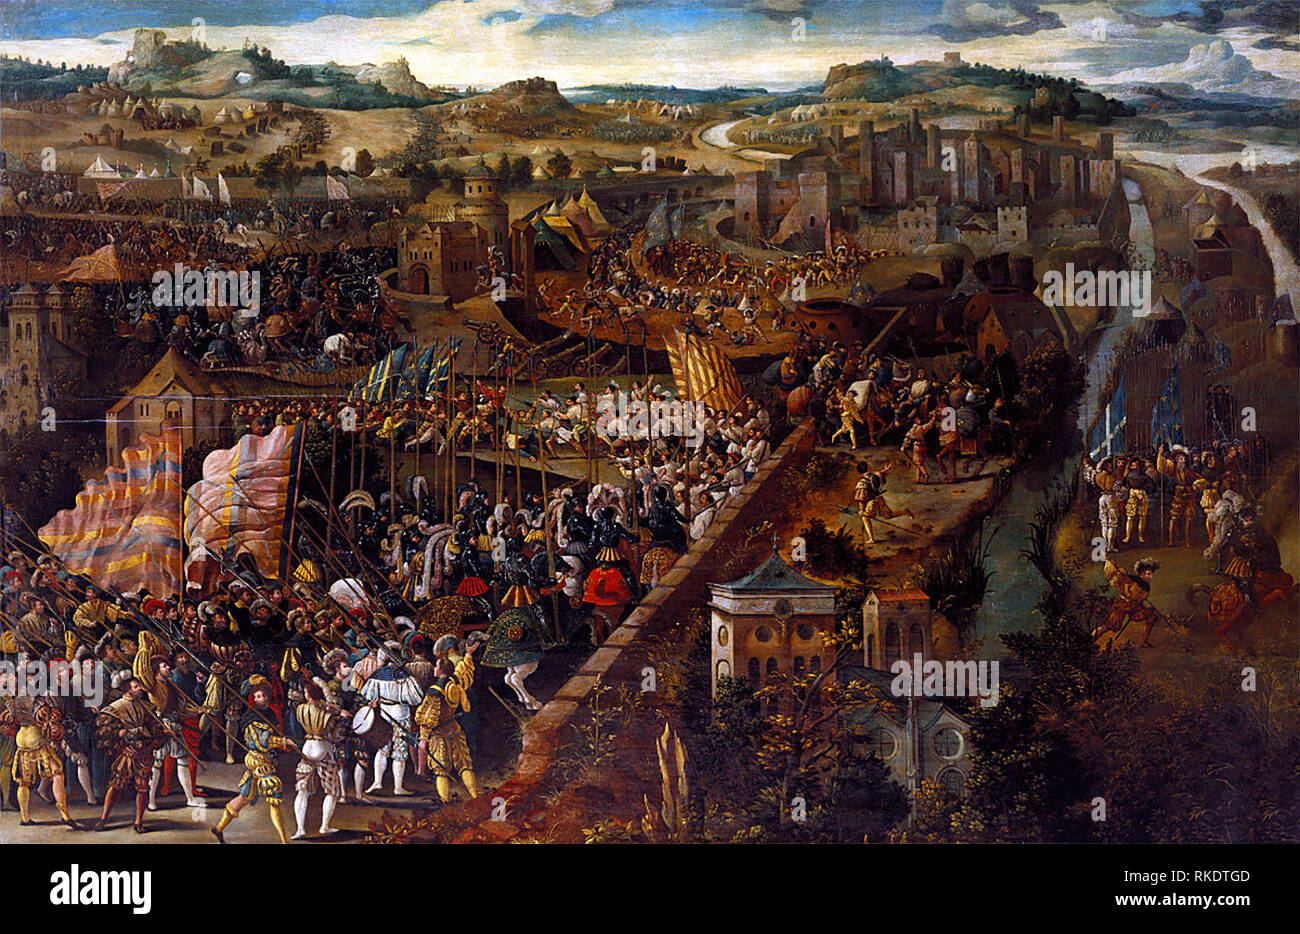 Battle of Pavia - A painting depicting the Battle of Pavia, a military engagement of February 24, 1525. Stock Photo